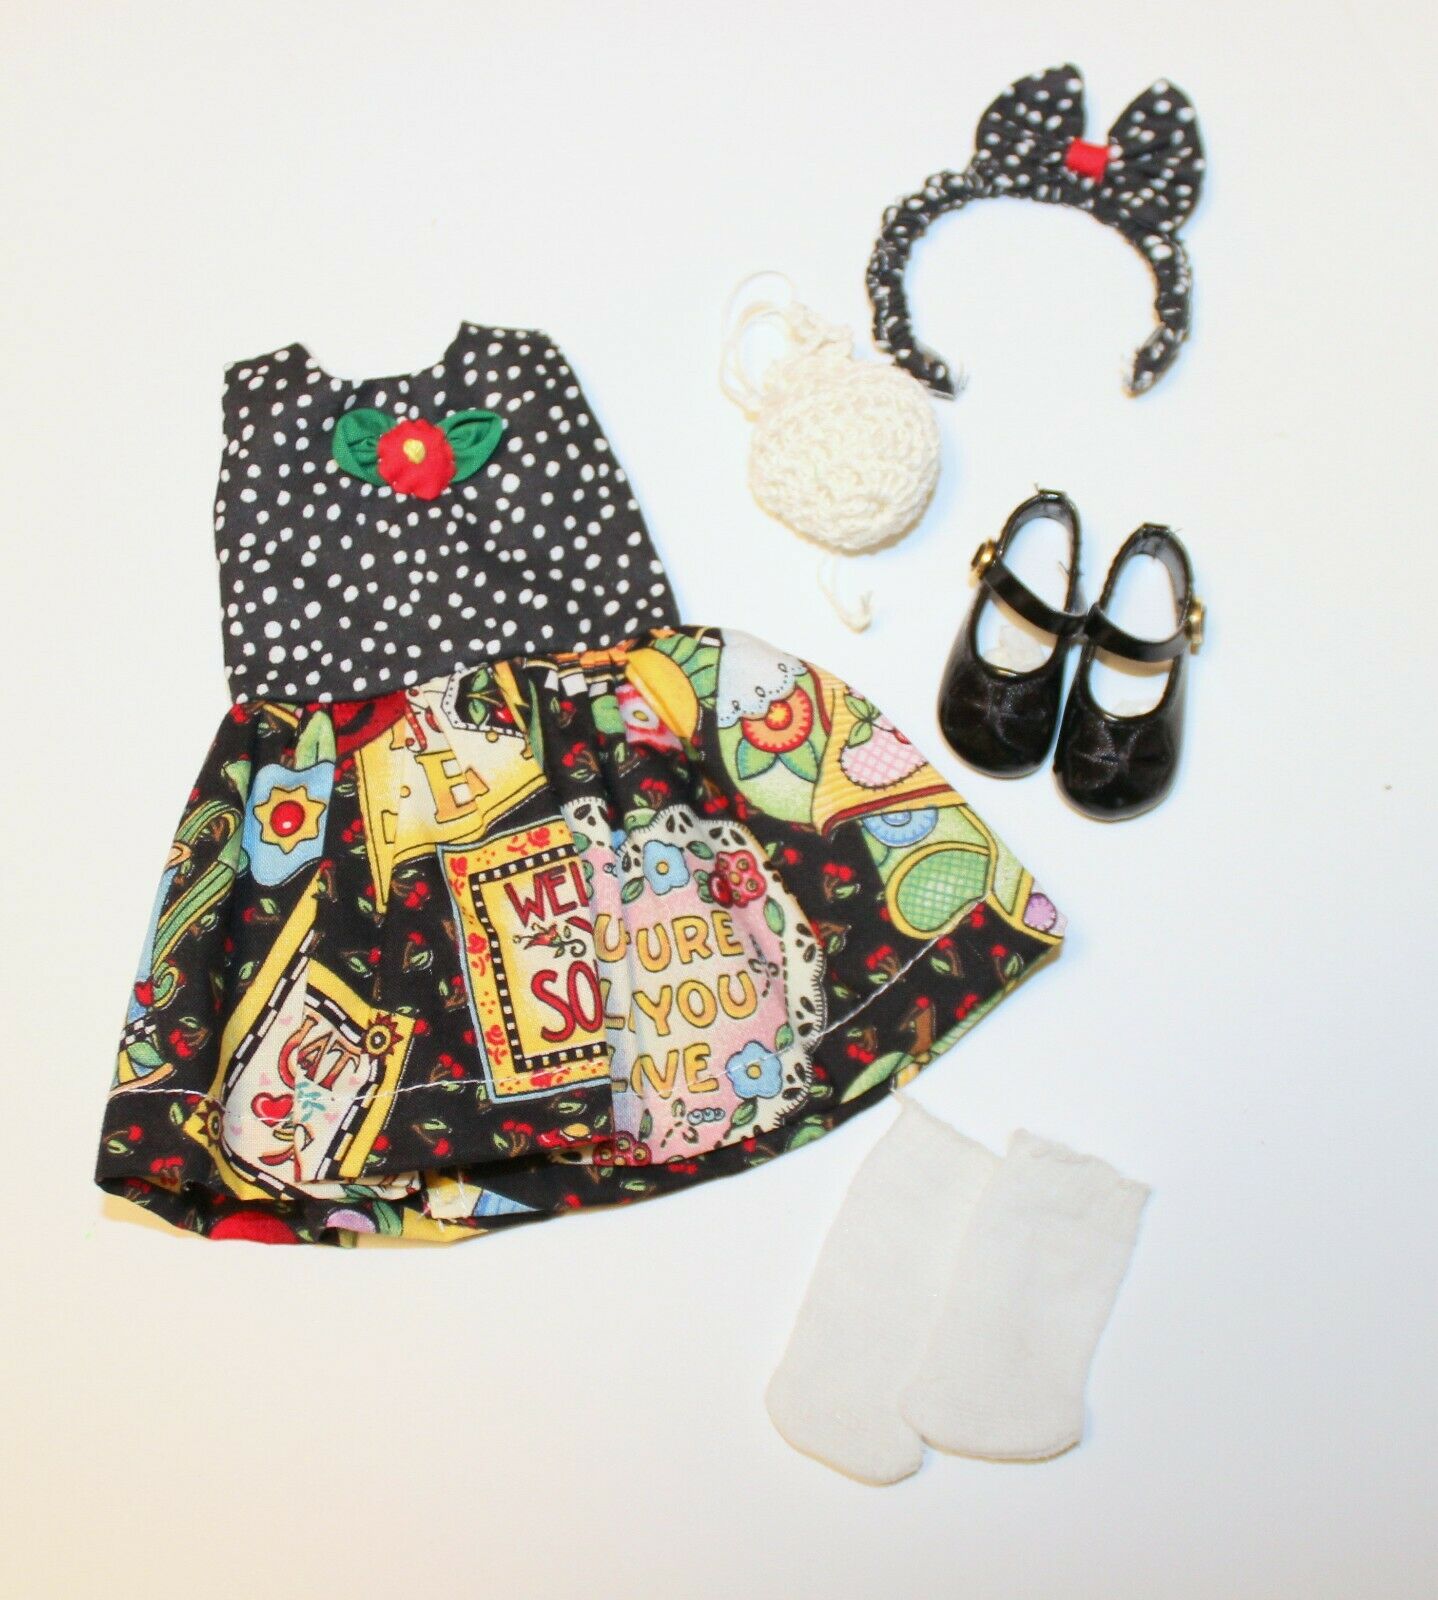 Pastyette Doll Outfit Pretty Print With Black Background & Accessories